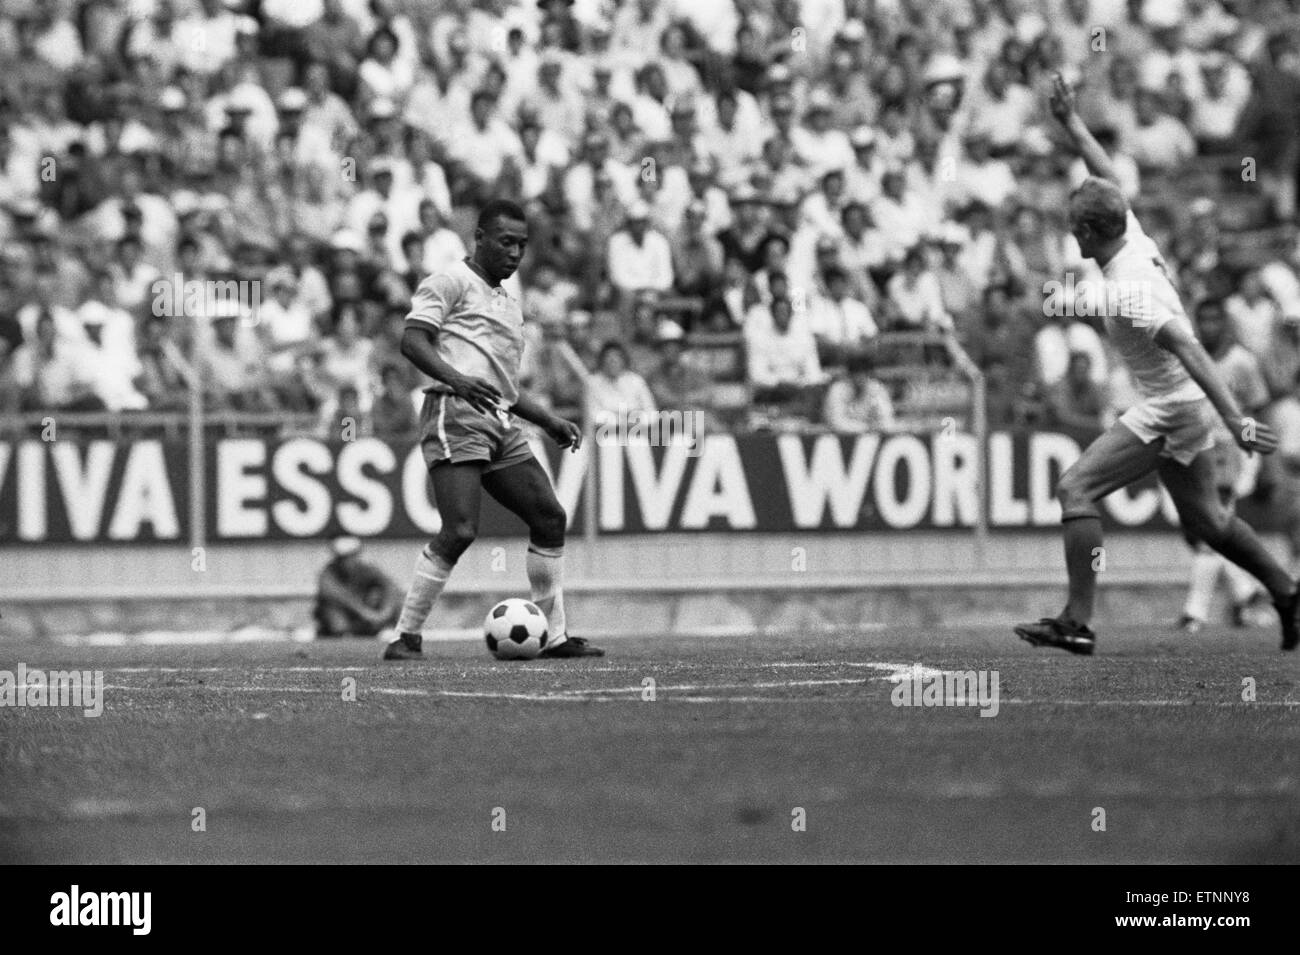 Brazil vs Czechoslovakia 1970 World Cup Group C. Brazil won 4-1 On the eve of Brazil's opening match in the 1970 World Cup expectations weren't as high as one might think in retrospect.  The then two-fold World Champions had left a poor impression in the Stock Photo